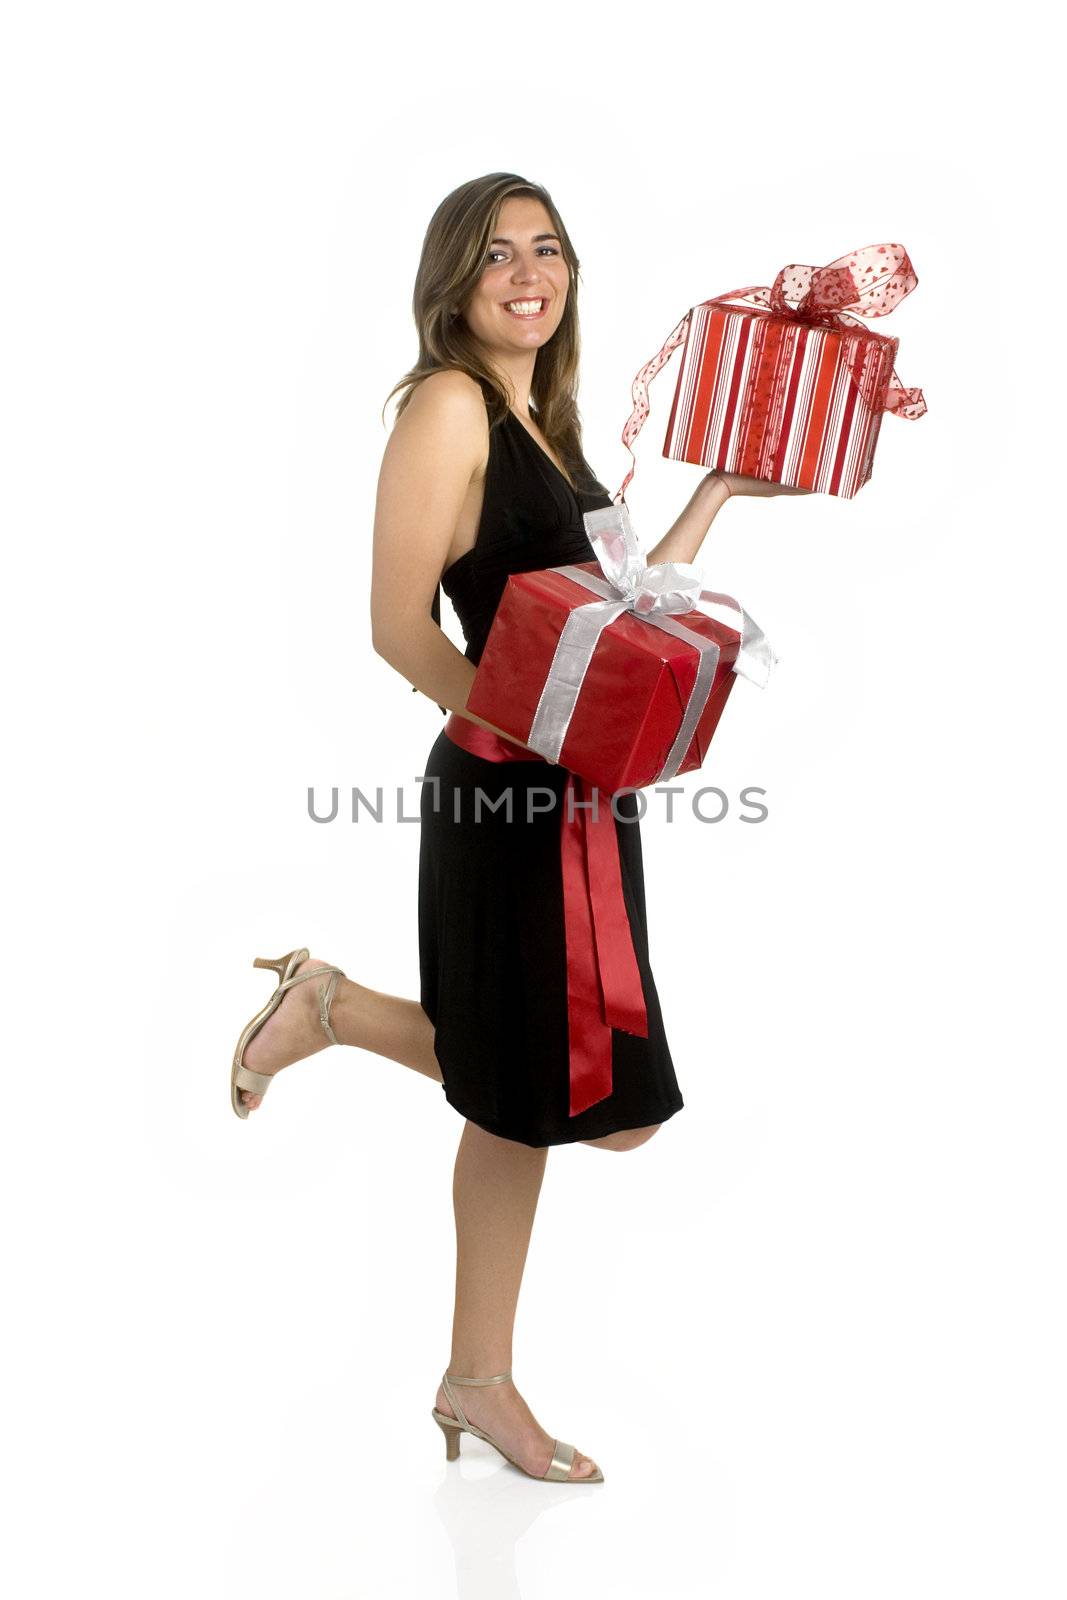 Happy woman isolated on a white background with presents.